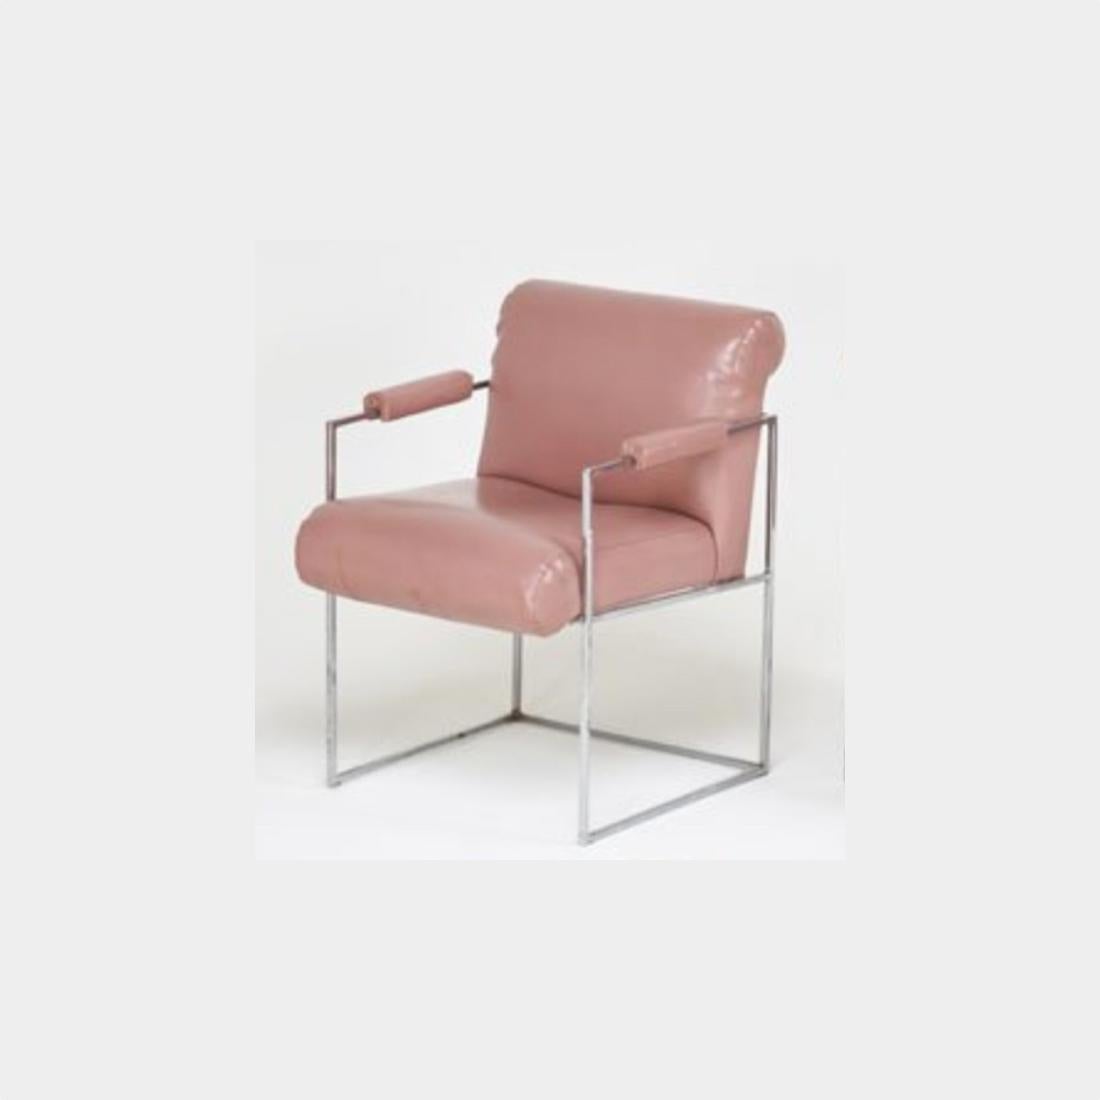 This trendy and stylish set of four (4) Milo Baughman for Thayer Coggins dining chairs are covered in a pink vinyl upholstery.

Excellent option for a breakfast or cafe table, a game table or dining table or can be used in a meeting room or